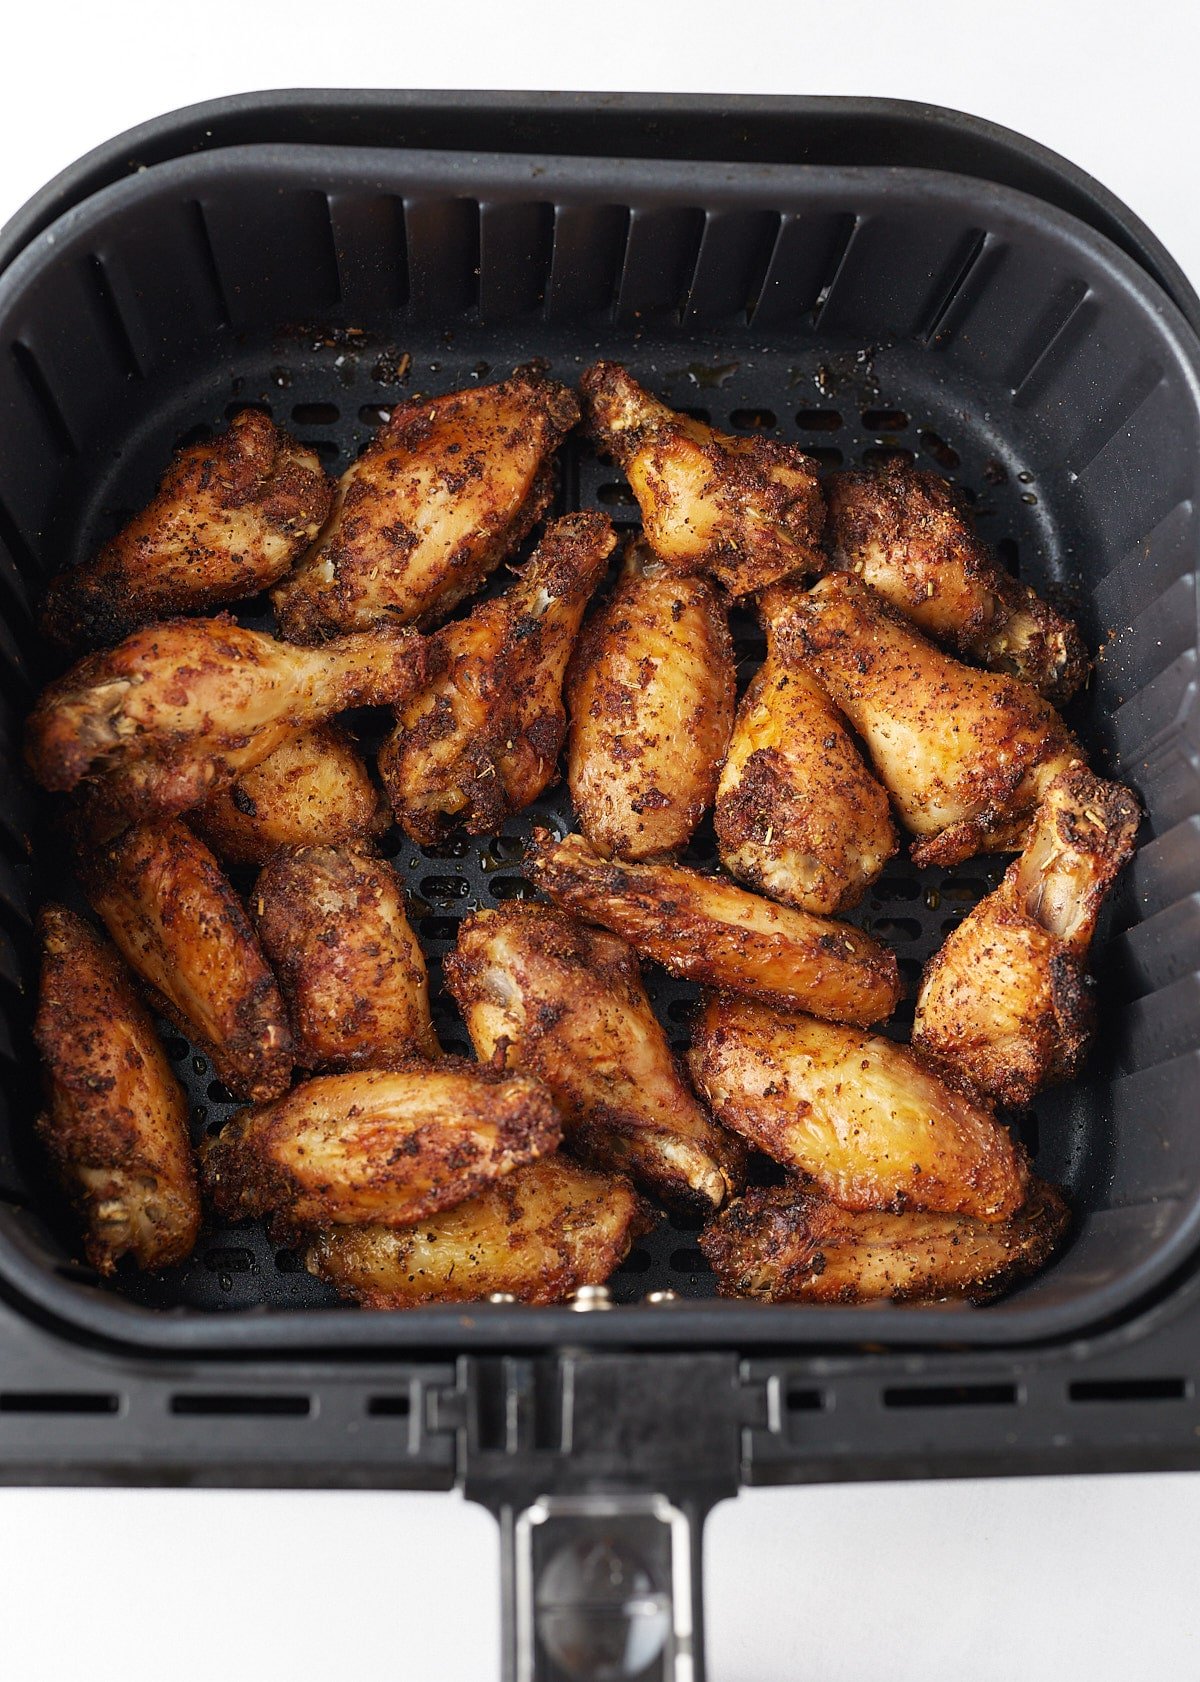 Cooked wings in an air fryer basket.